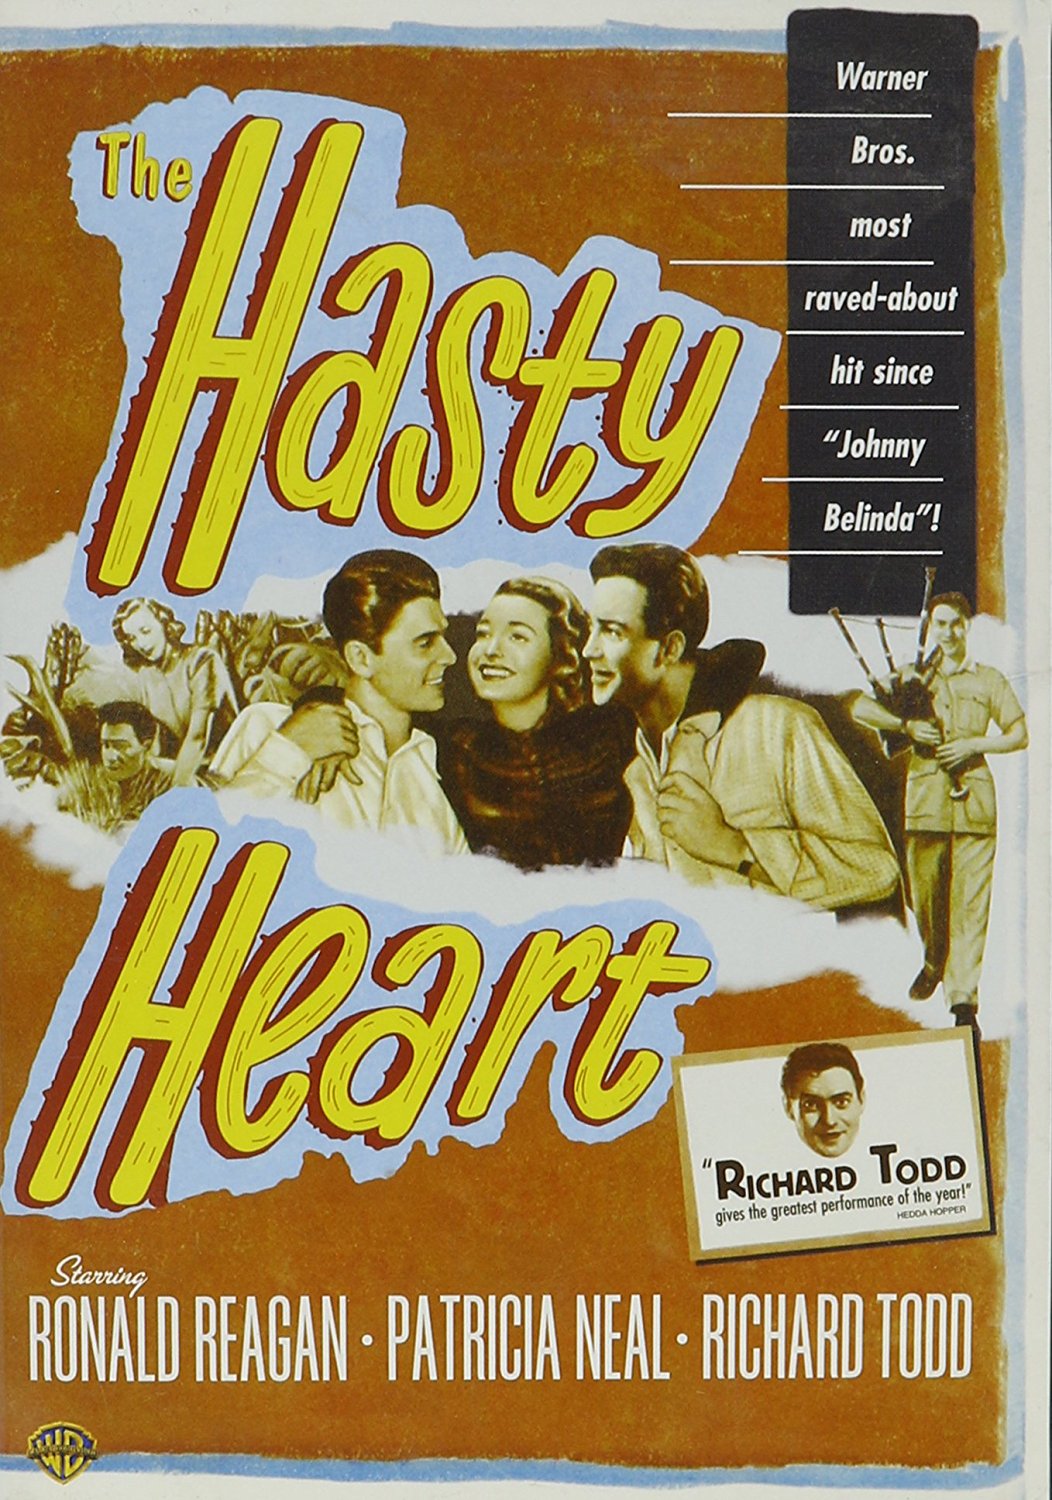 The Hasty Heart (1949) starring Richard Todd, Ronald Reagan, Patricia Neal - Warner Brothers most raved-about hit since "Johnny Belinda"